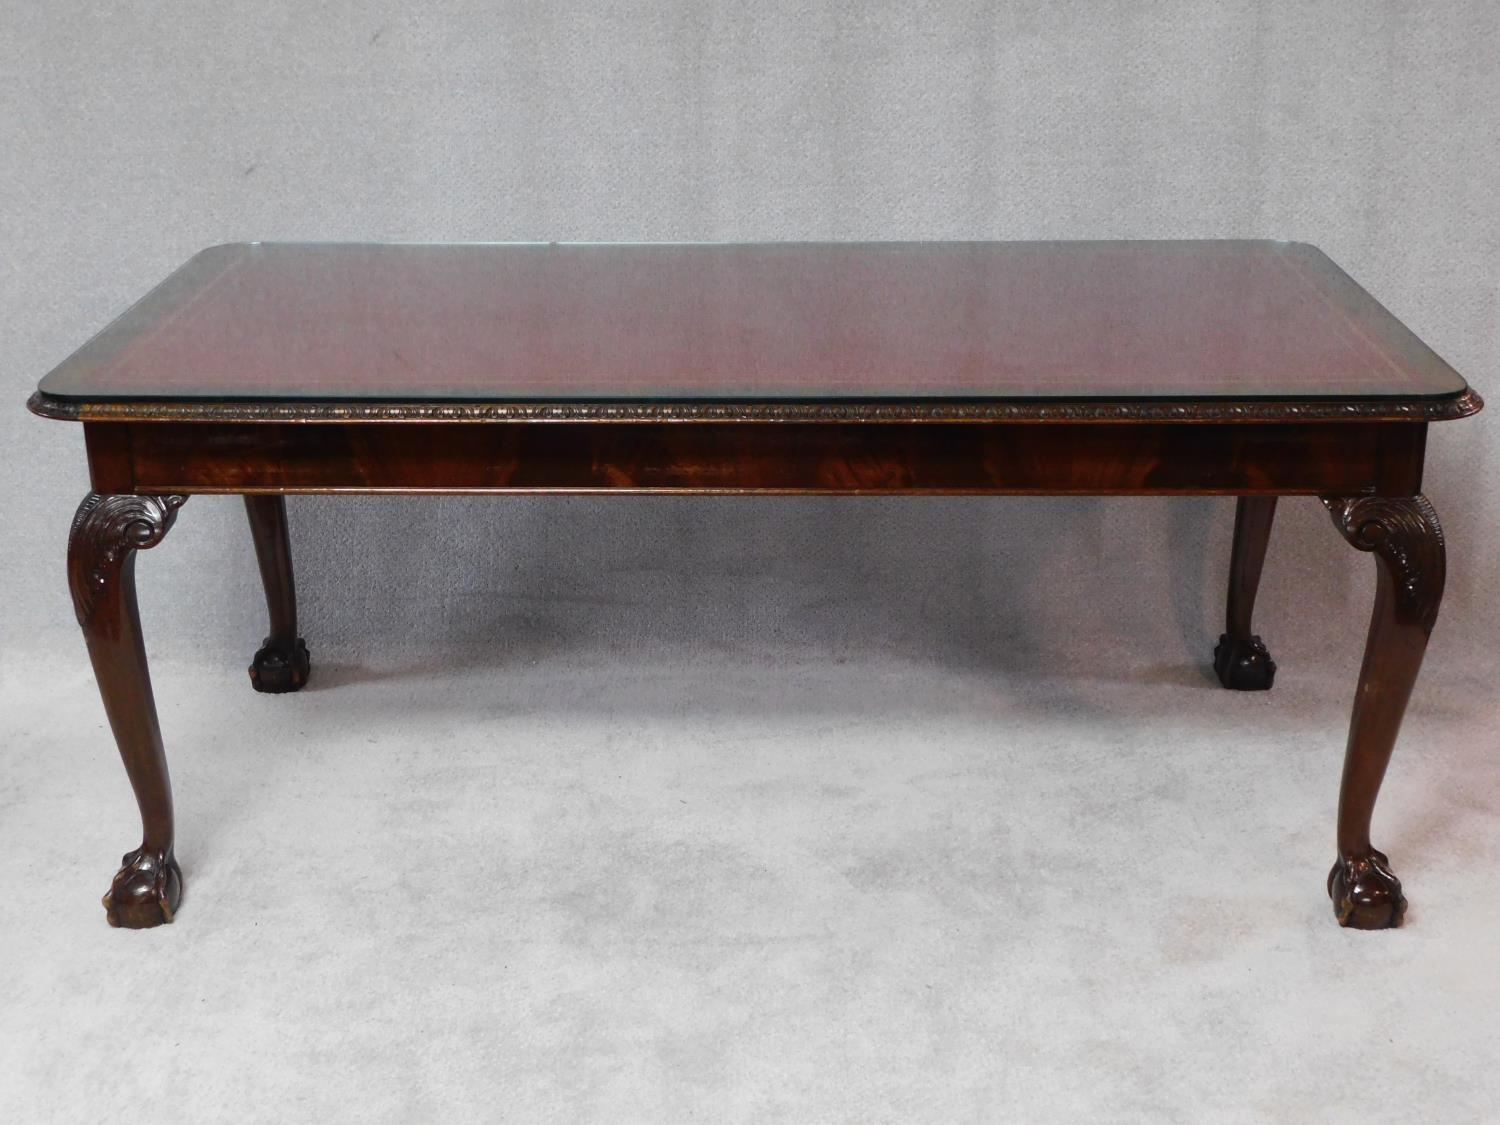 A mid Georgian style mahogany library table with inset tooled leather top on carved cabriole